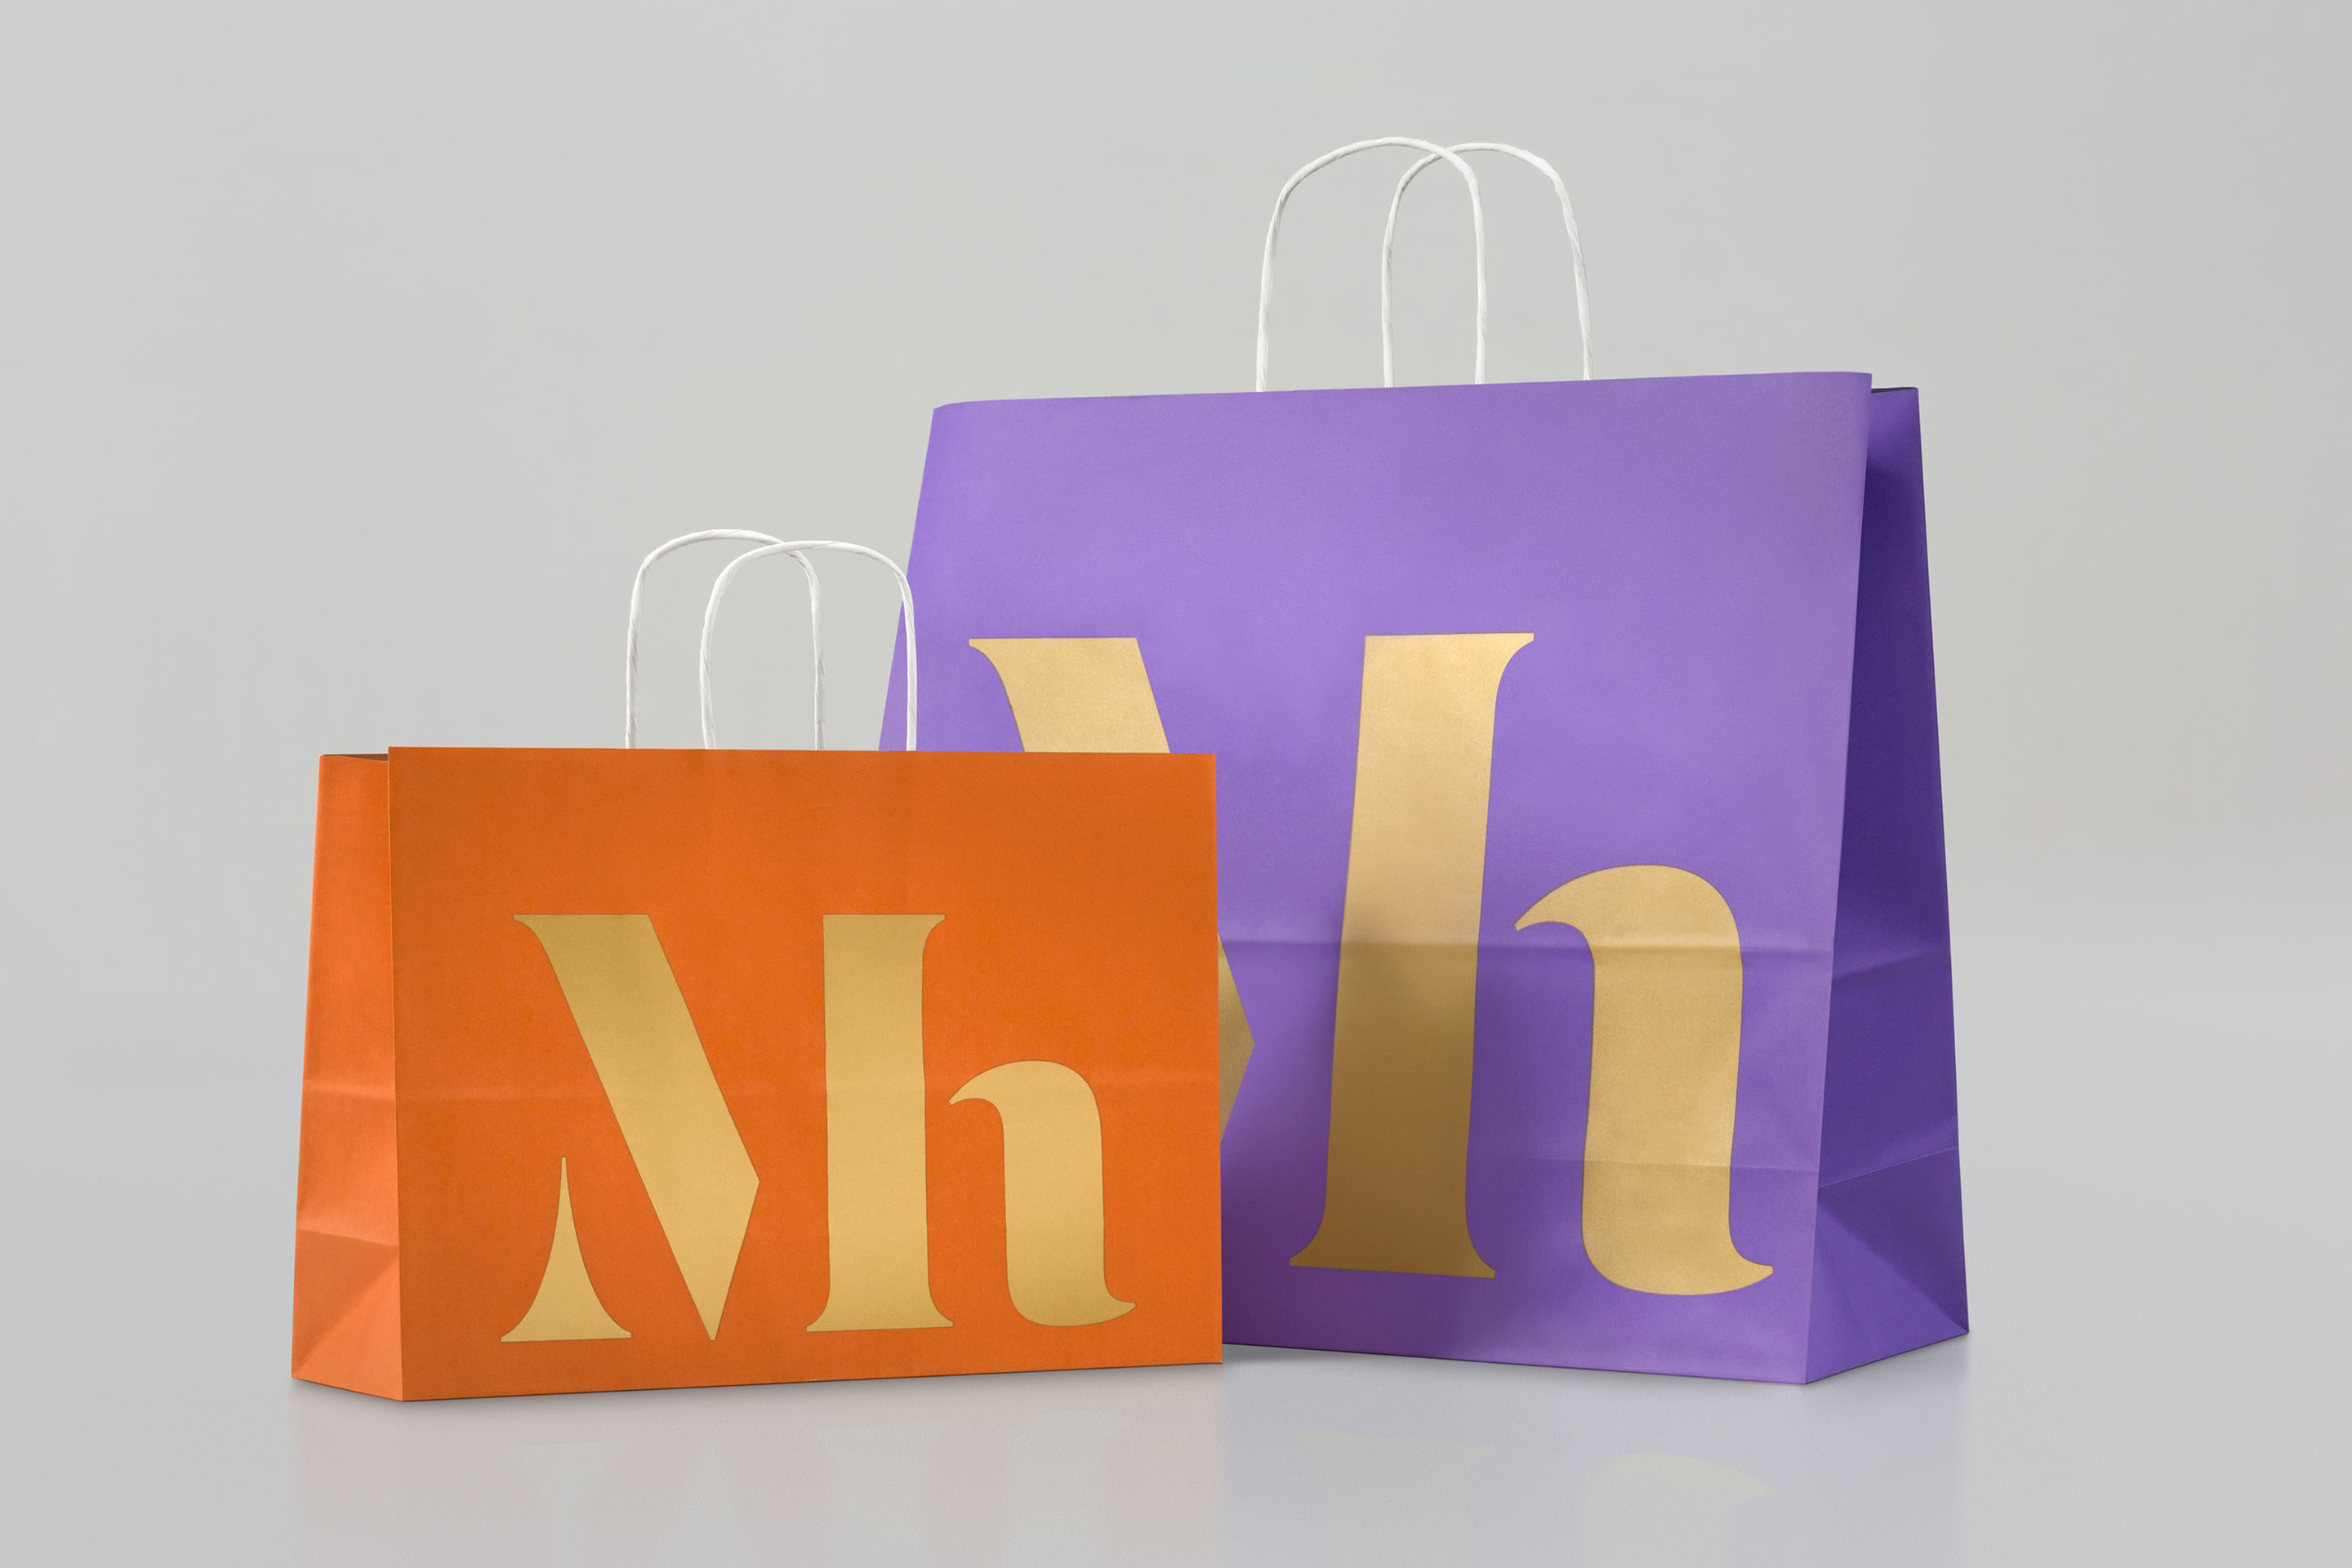 Monogram and print with metallic paper and spot colour detail designed by Dumbar for Mauritshuis